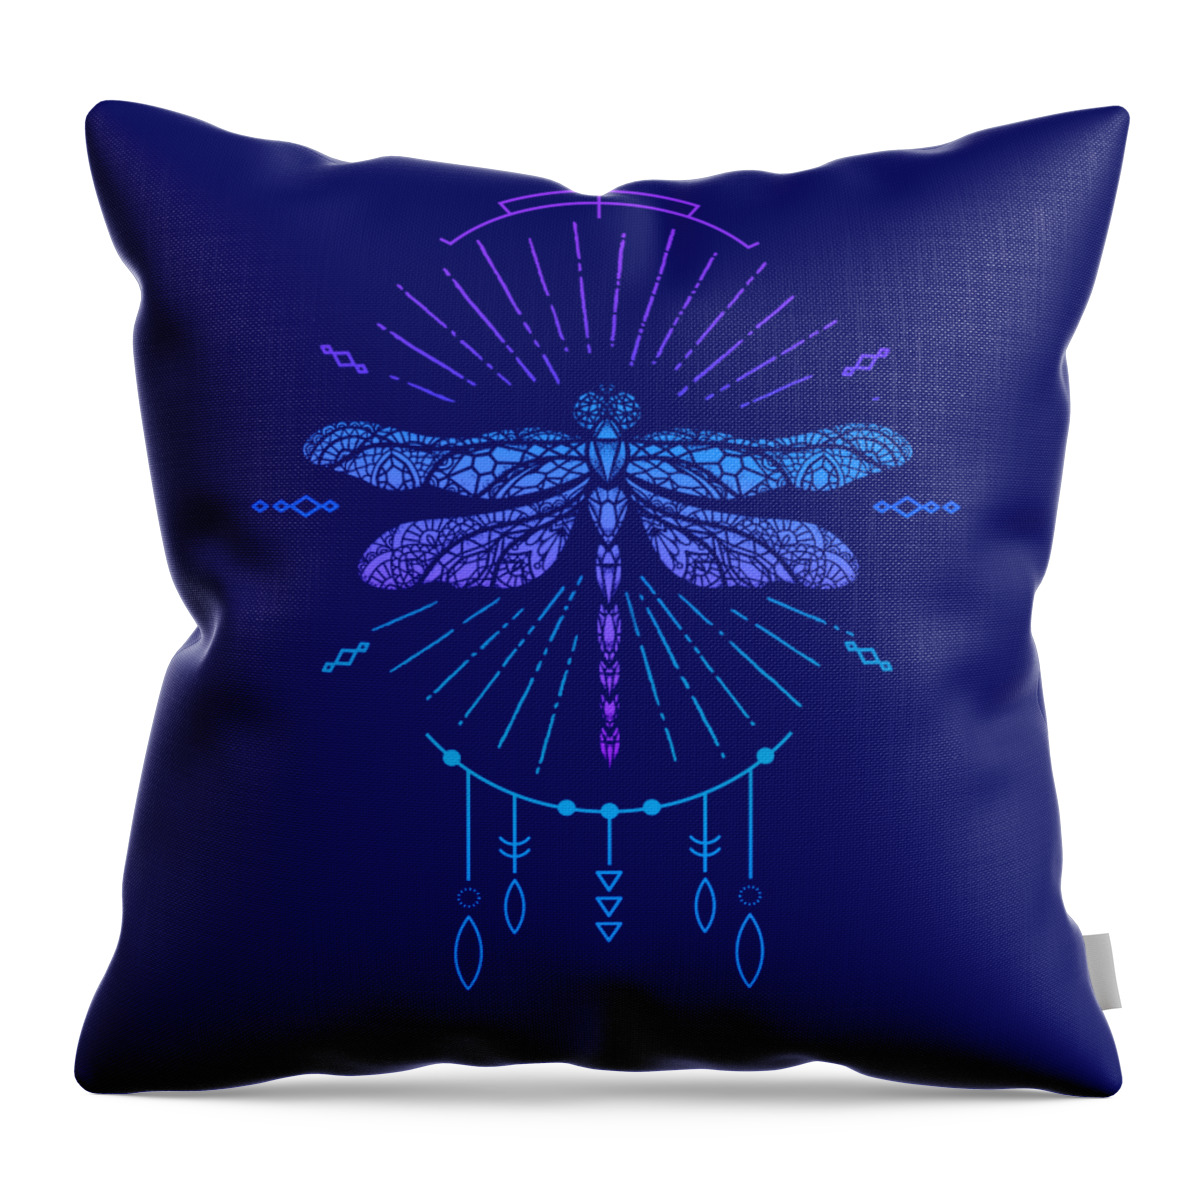 Dragonfly Throw Pillow featuring the digital art Geometric Blue Boho Dragonfly by Laura Ostrowski